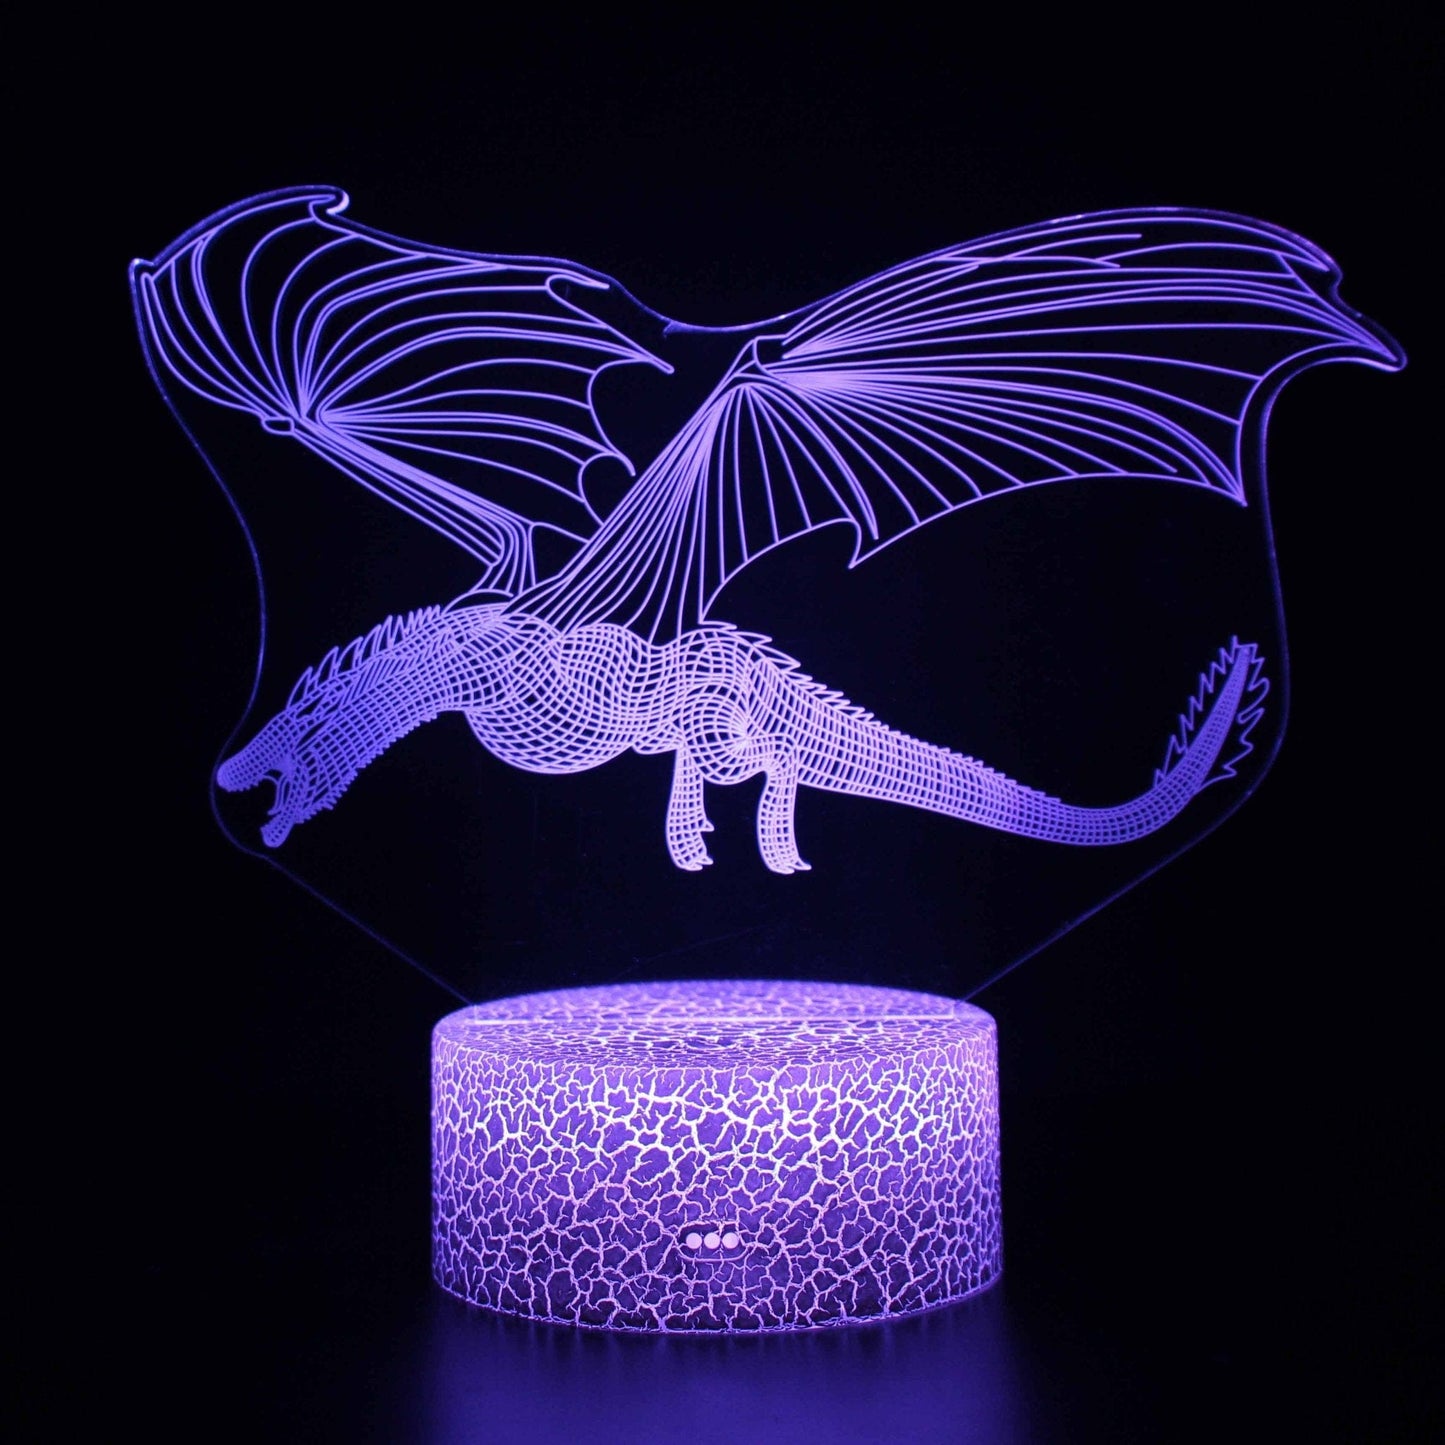 Dinosaur Series 3D Table Lamp LED Colorful Touch Remote Control Gift Nightlight - CLASSY CLOSET BOUTIQUEDinosaur Series 3D Table Lamp LED Colorful Touch Remote Control Gift NightlighteperloA9C3B15DF212451DBD52636919E54151KX-11767 Colors No Remote